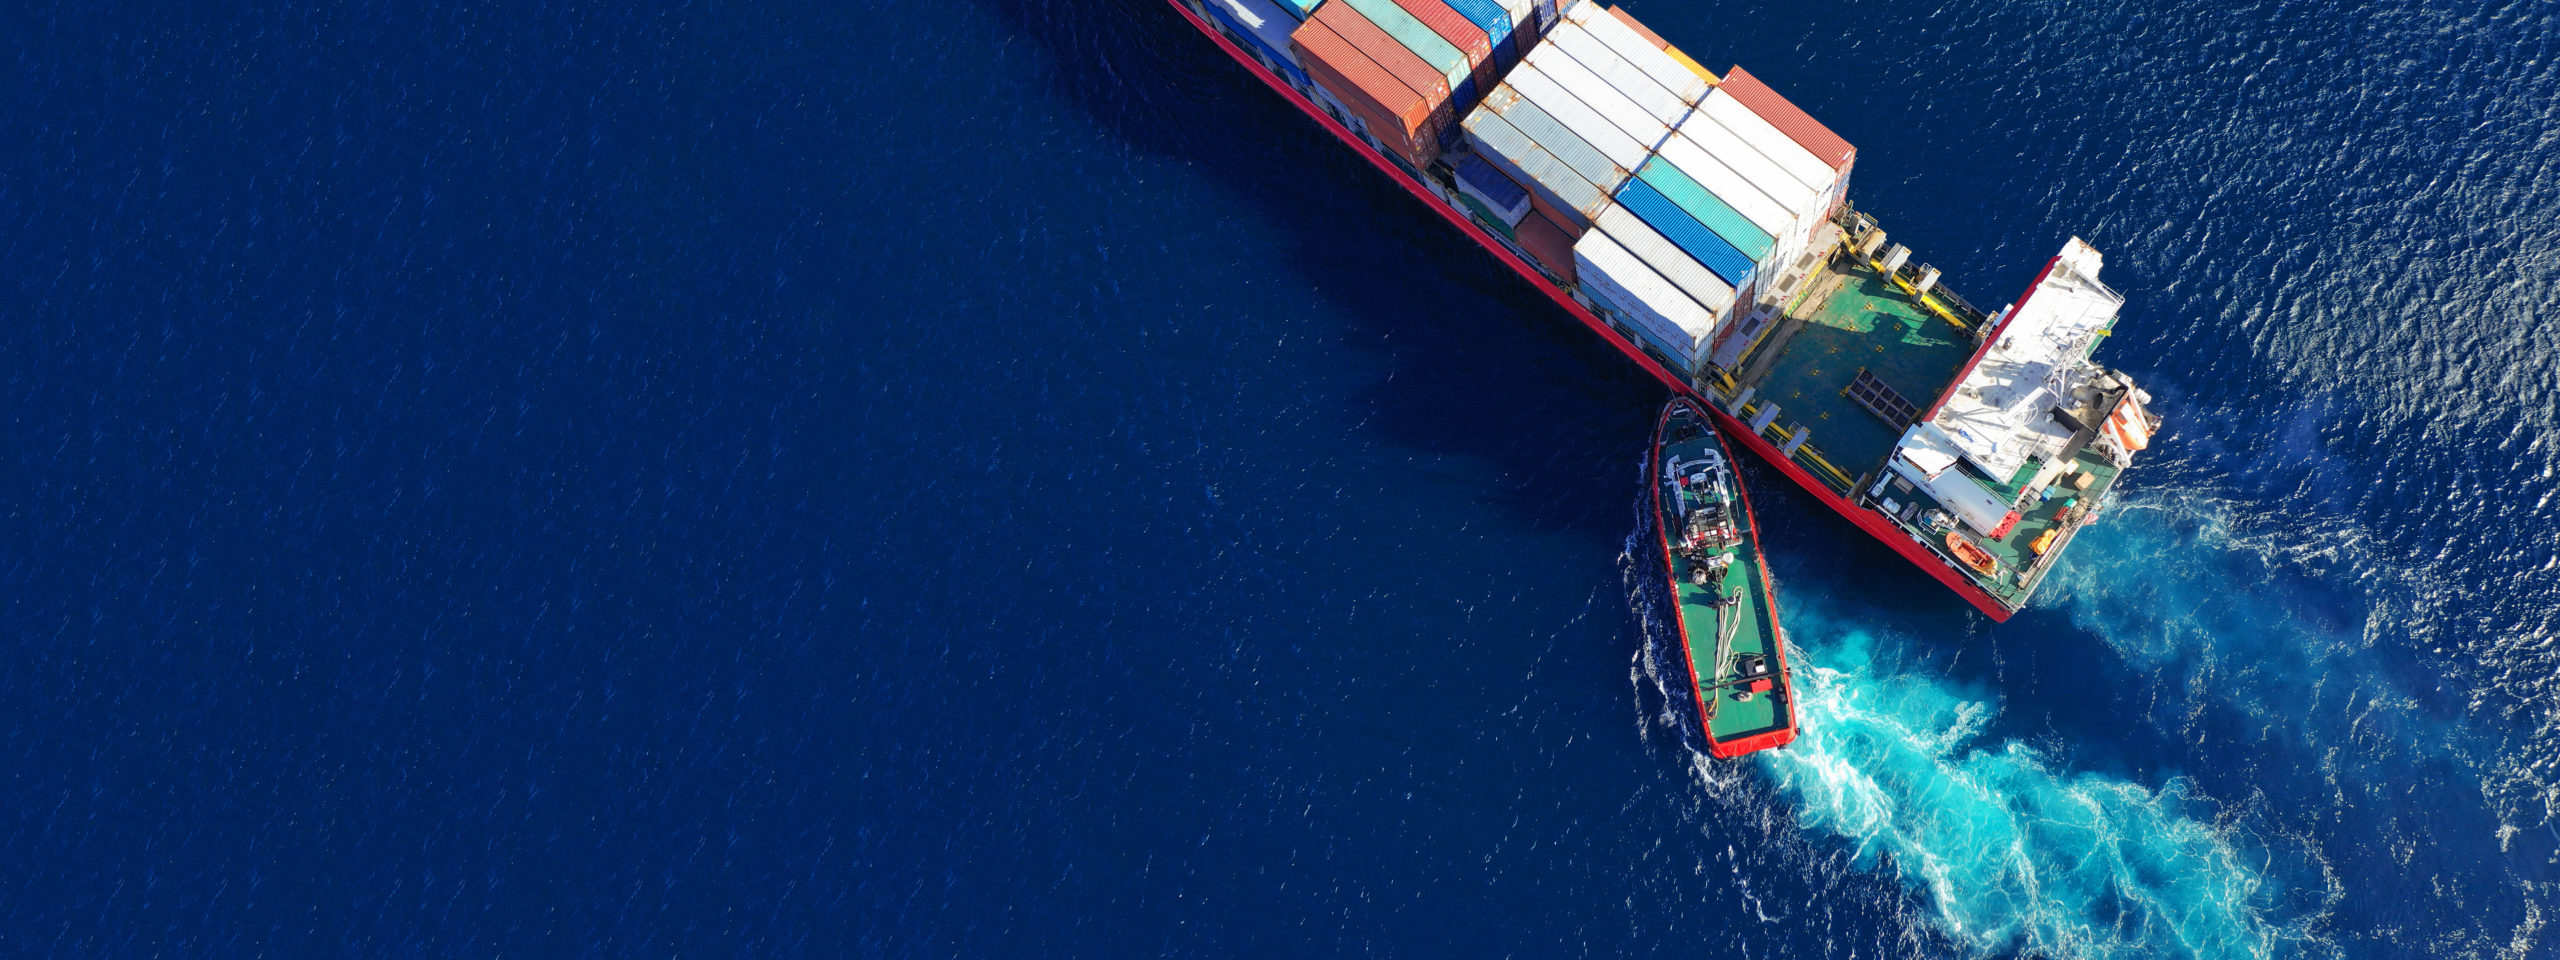 aerial shot of container ship in deep sea